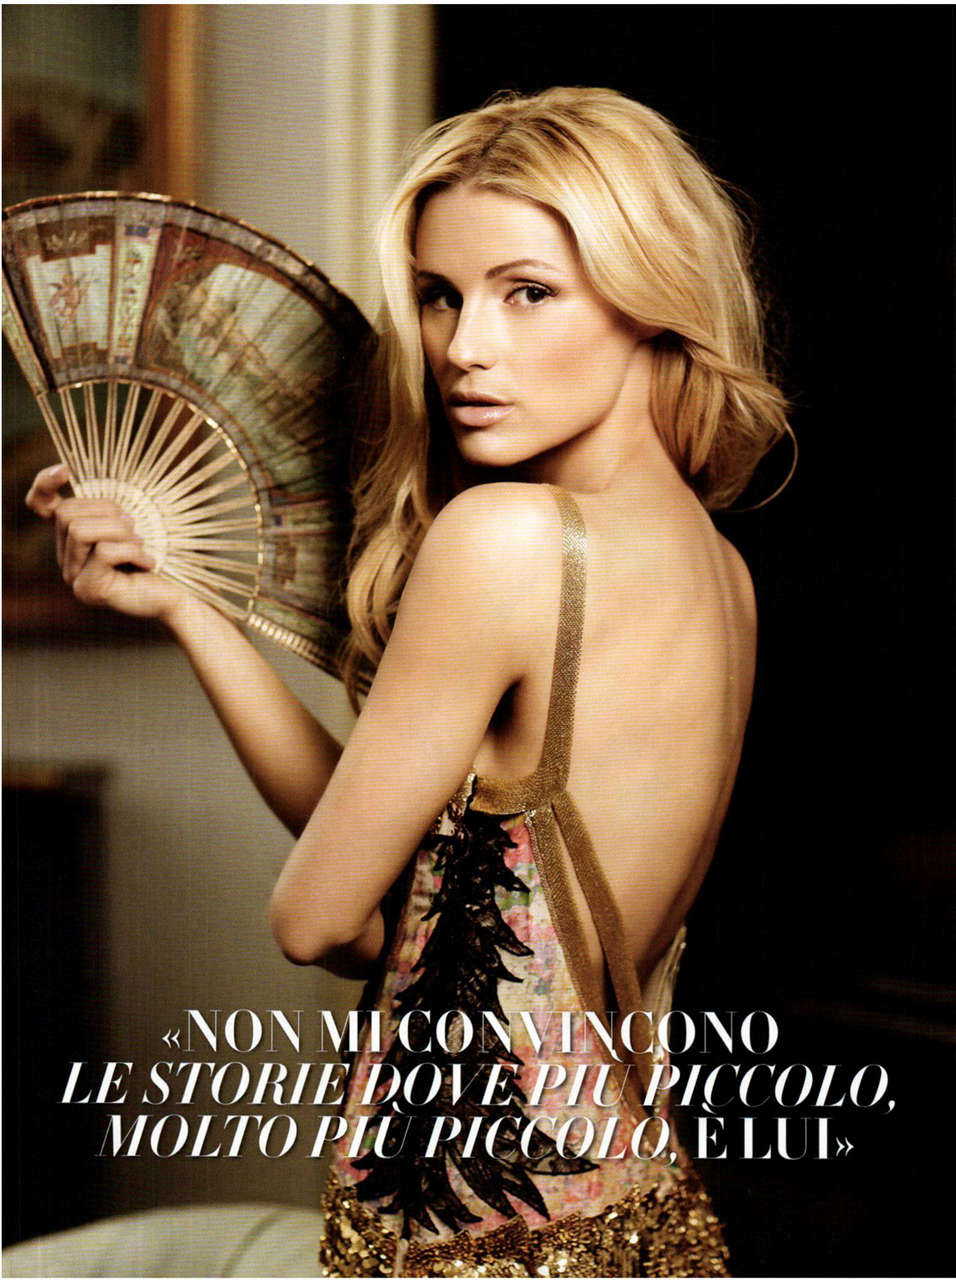 Micelle Hunziker Vanity Fair Magazine Italy March 2012 Issue